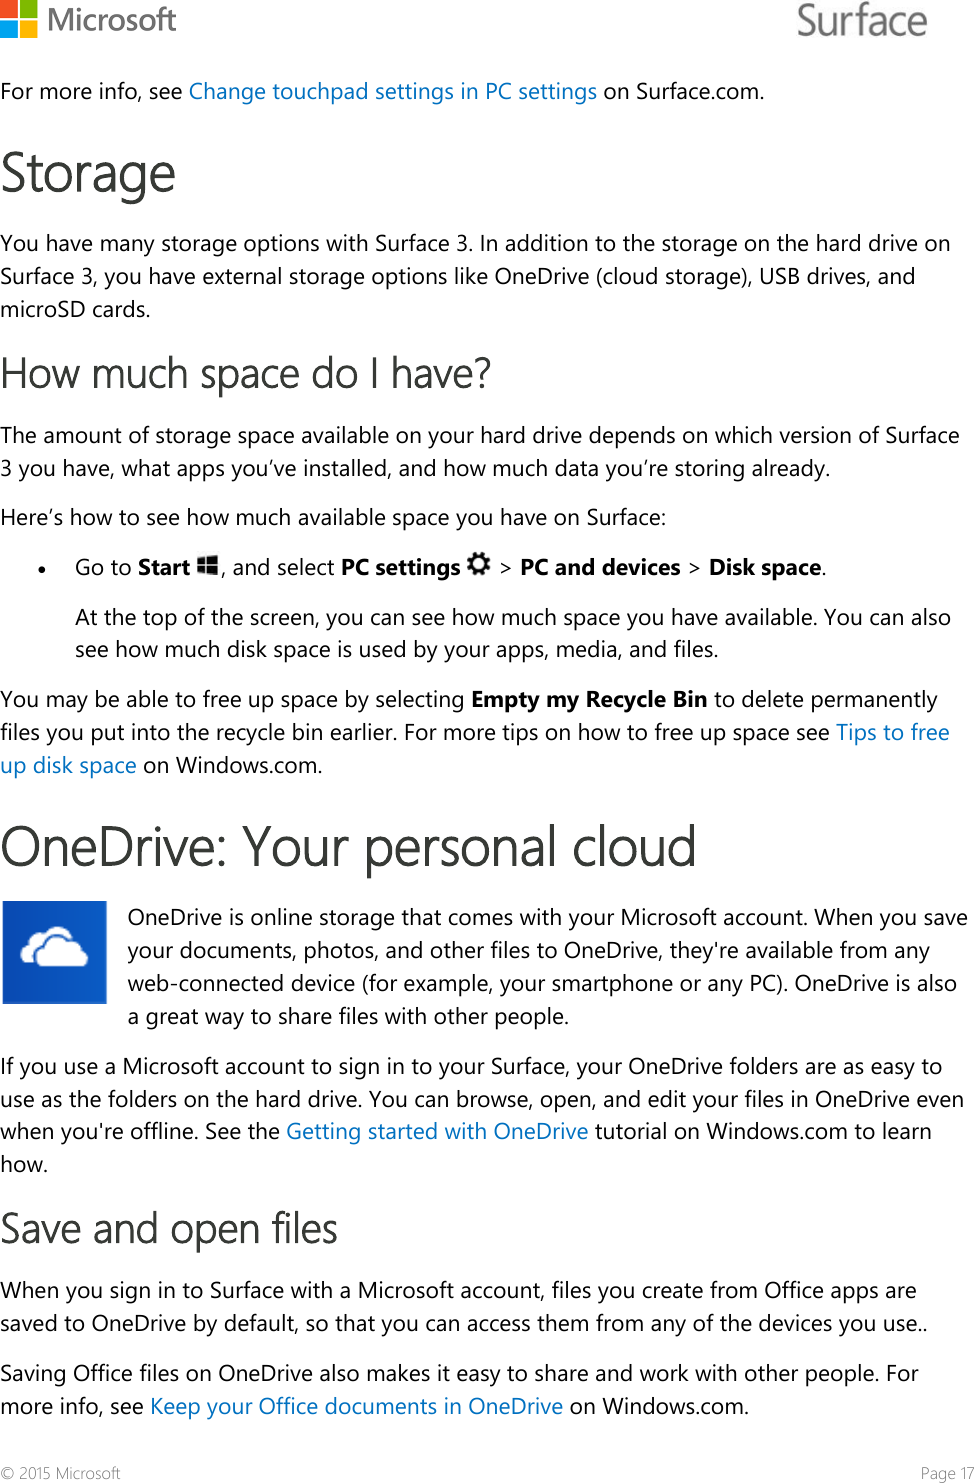    For more info, see Change touchpad settings in PC settings on Surface.com.  Storage  You have many storage options with Surface 3. In addition to the storage on the hard drive on Surface 3, you have external storage options like OneDrive (cloud storage), USB drives, and microSD cards.  How much space do I have? The amount of storage space available on your hard drive depends on which version of Surface 3 you have, what apps you’ve installed, and how much data you’re storing already. Here’s how to see how much available space you have on Surface:  • Go to Start , and select PC settings   &gt; PC and devices &gt; Disk space.  At the top of the screen, you can see how much space you have available. You can also see how much disk space is used by your apps, media, and files.  You may be able to free up space by selecting Empty my Recycle Bin to delete permanently files you put into the recycle bin earlier. For more tips on how to free up space see Tips to free up disk space on Windows.com. OneDrive: Your personal cloud OneDrive is online storage that comes with your Microsoft account. When you save your documents, photos, and other files to OneDrive, they&apos;re available from any web-connected device (for example, your smartphone or any PC). OneDrive is also a great way to share files with other people.  If you use a Microsoft account to sign in to your Surface, your OneDrive folders are as easy to use as the folders on the hard drive. You can browse, open, and edit your files in OneDrive even when you&apos;re offline. See the Getting started with OneDrive tutorial on Windows.com to learn how. Save and open files When you sign in to Surface with a Microsoft account, files you create from Office apps are saved to OneDrive by default, so that you can access them from any of the devices you use..  Saving Office files on OneDrive also makes it easy to share and work with other people. For more info, see Keep your Office documents in OneDrive on Windows.com.  © 2015 Microsoft    Page 17 